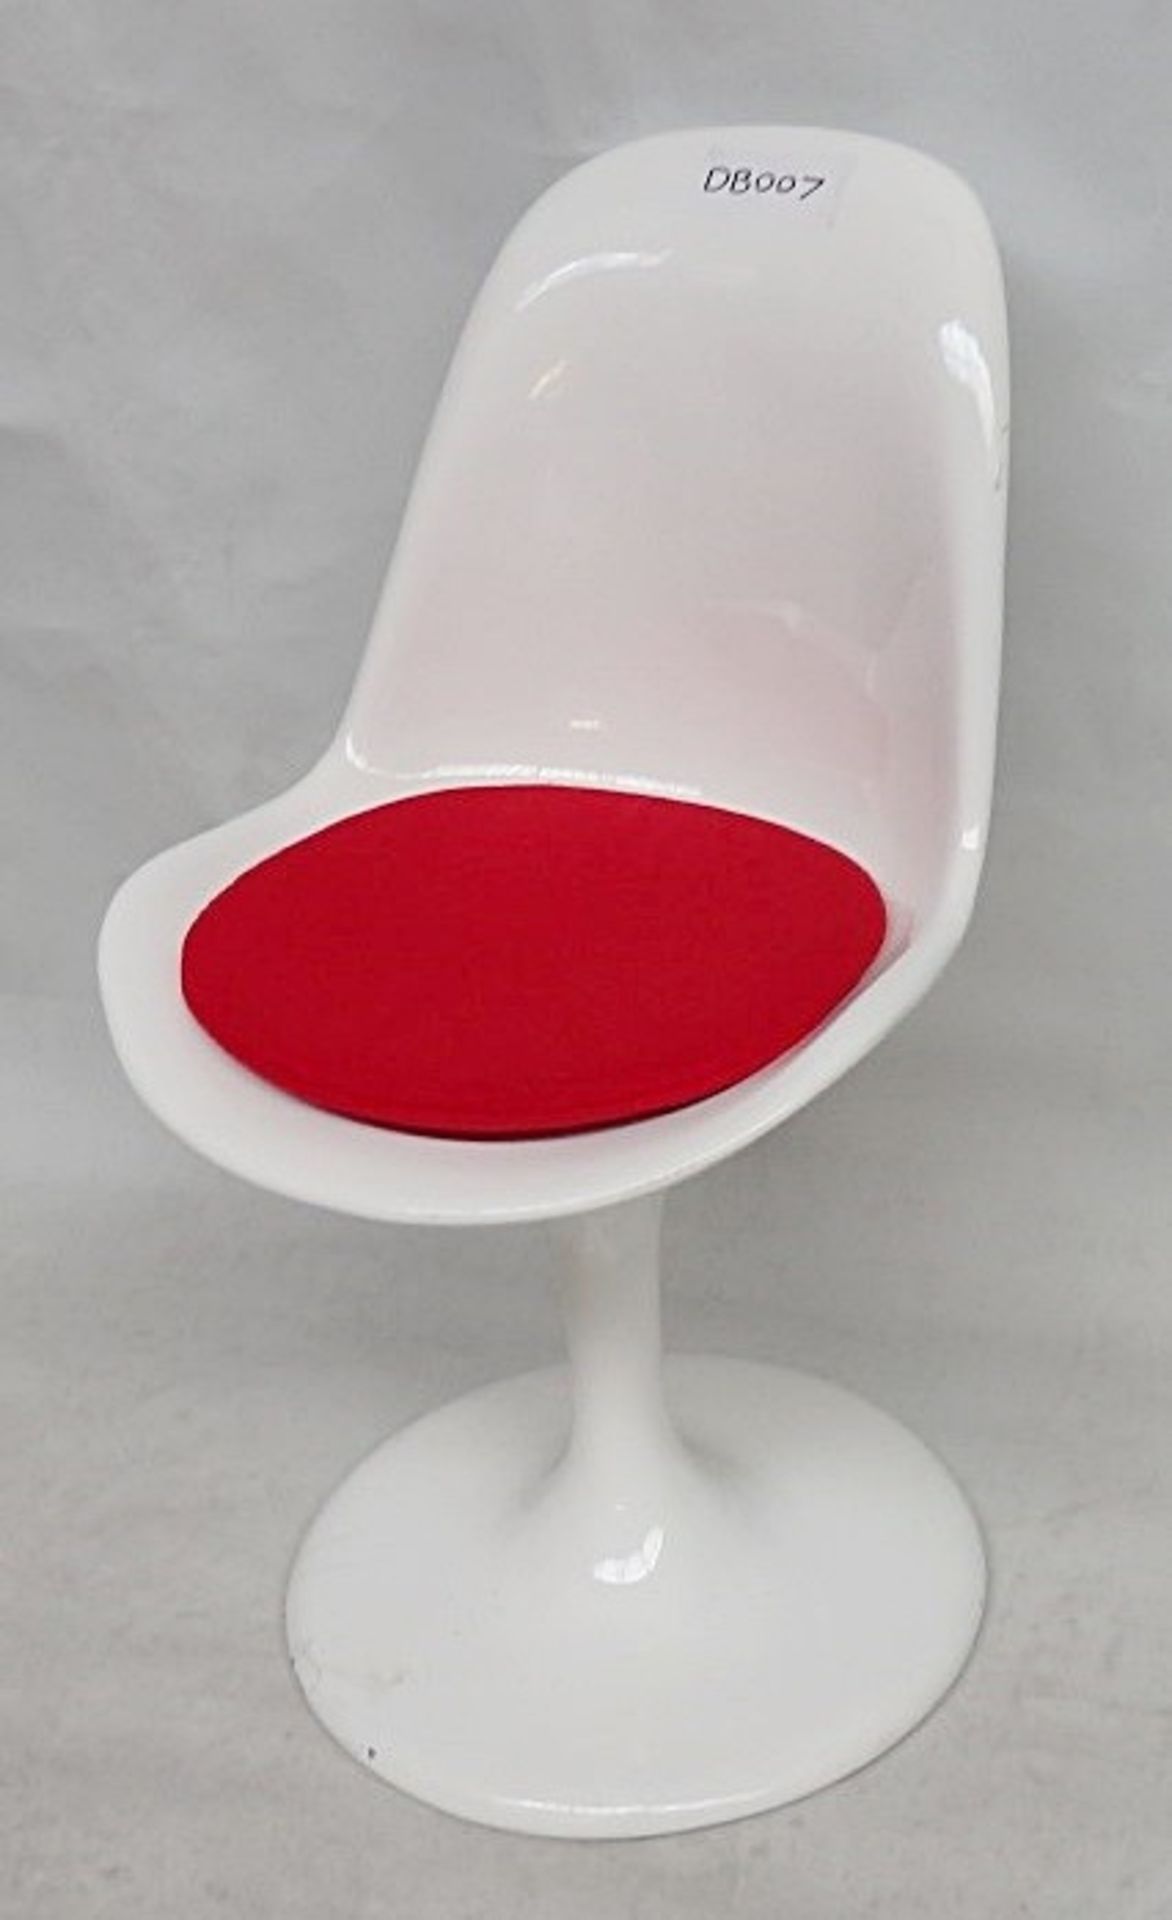 1 x Retro Style Swivel Chair With A White Hi-gloss Finish - Includes Cushion As Shown - - Image 5 of 7